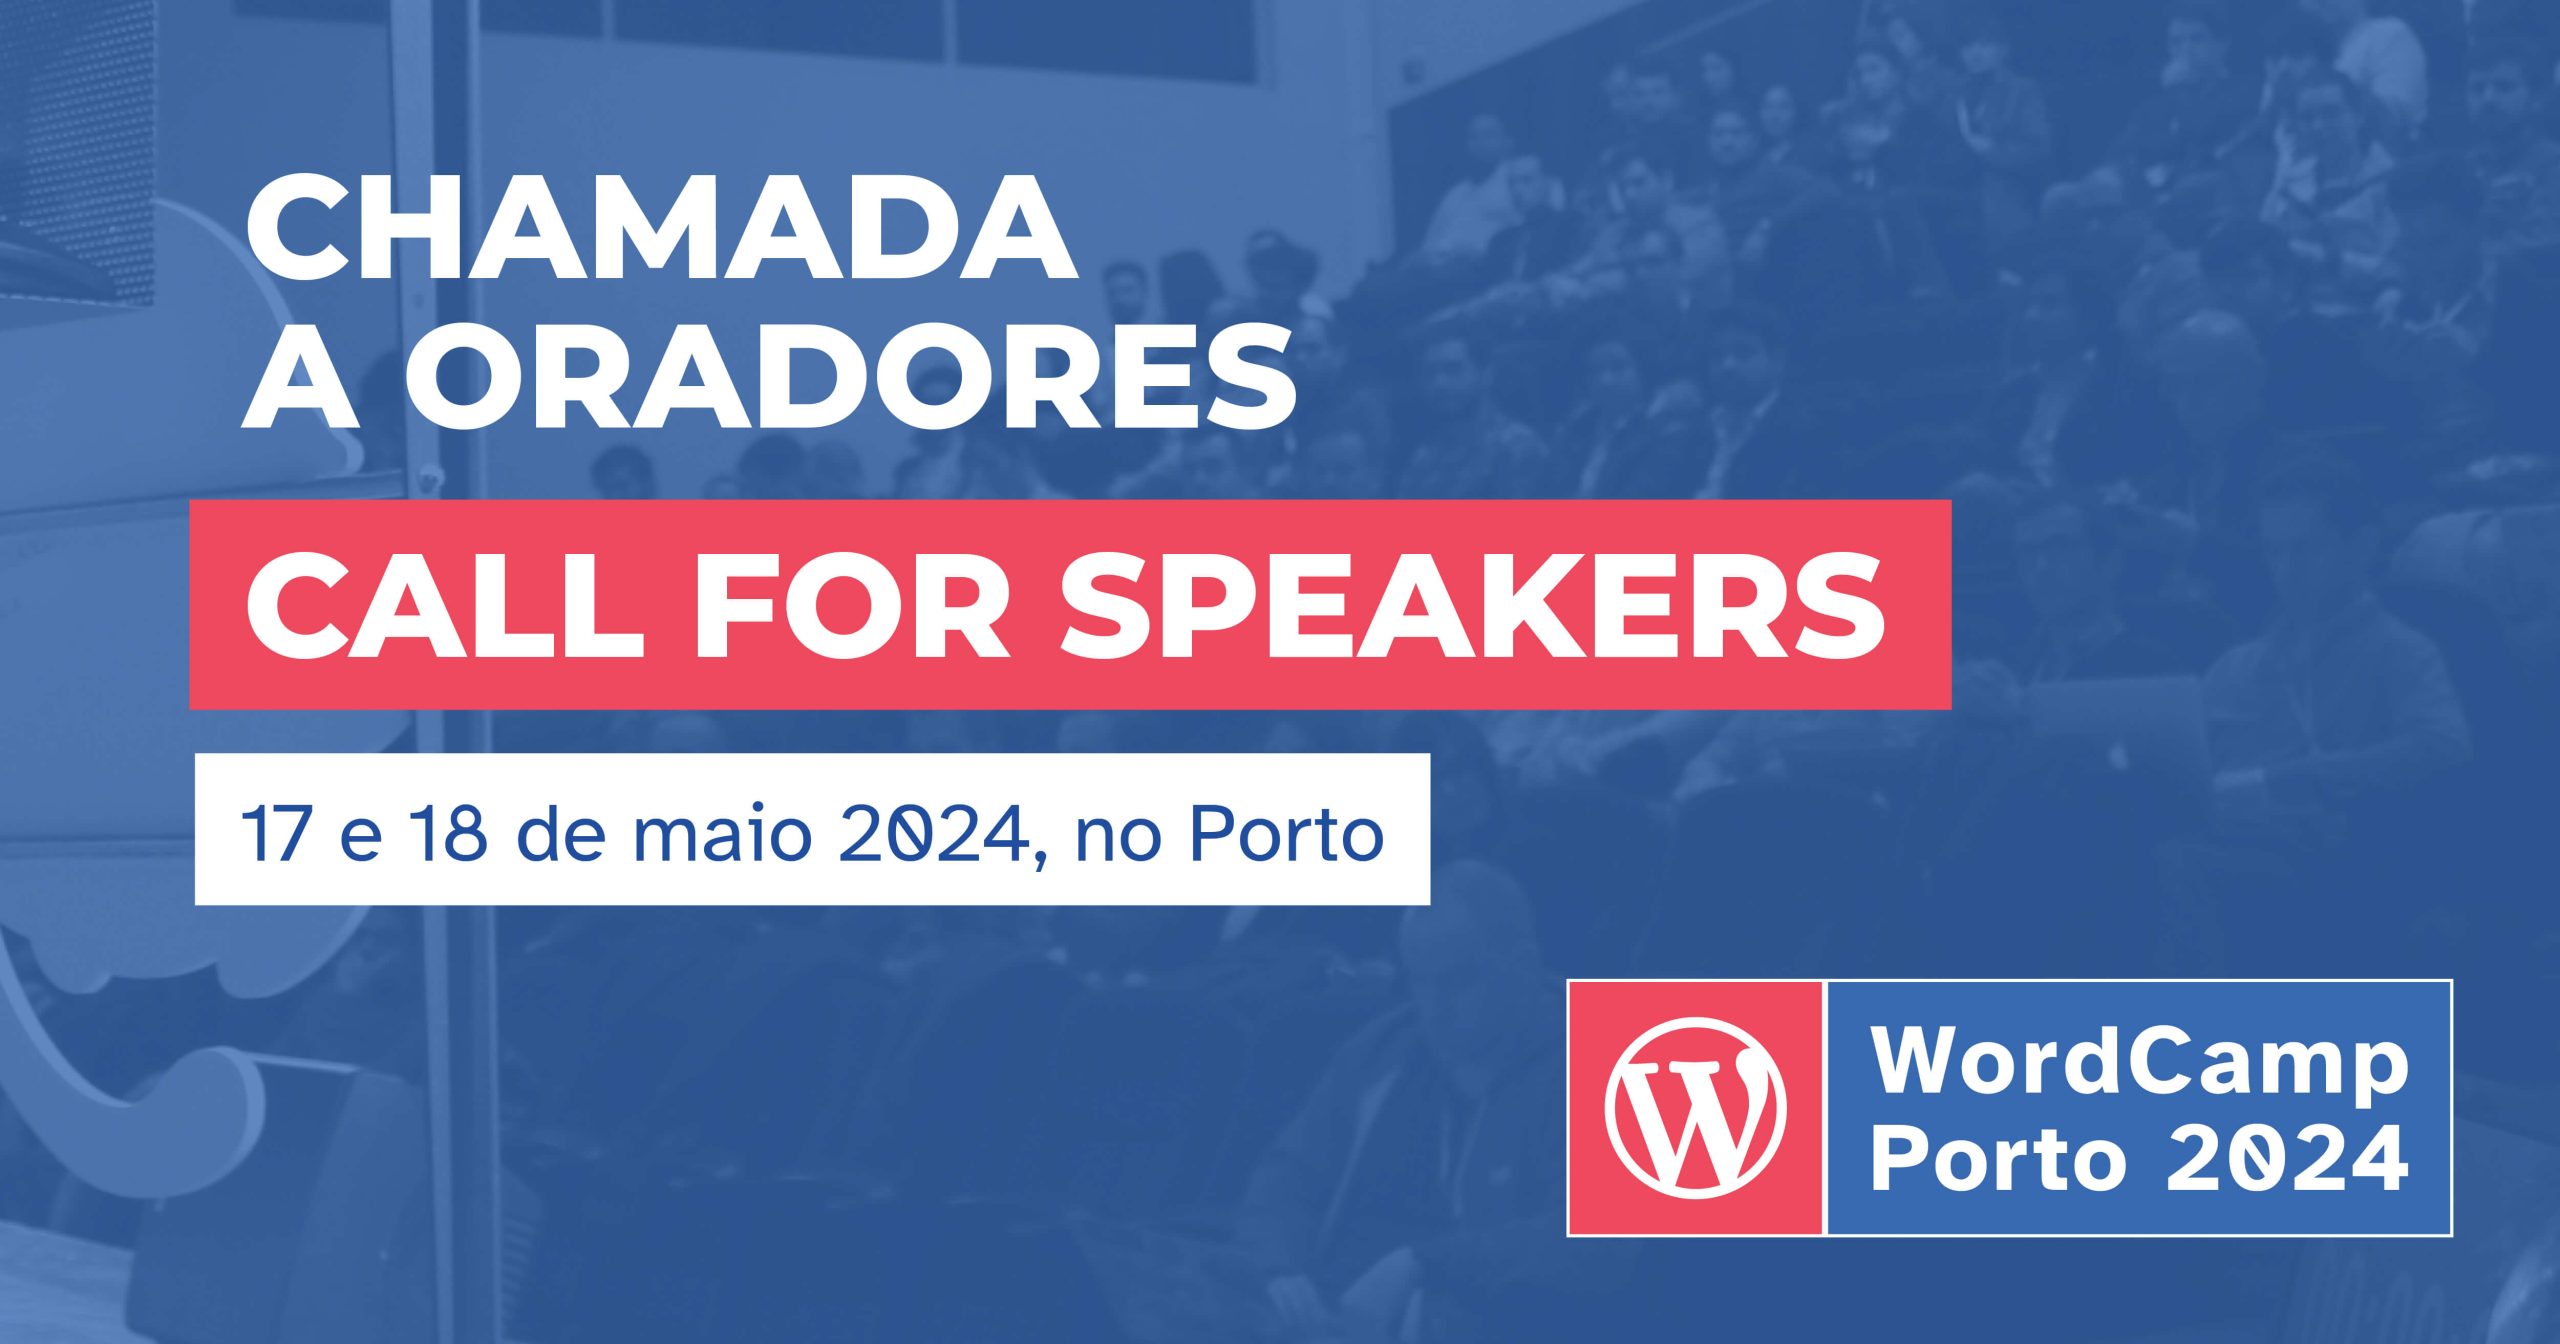 Your chance to shine as a Speaker at WordCamp Porto 2024!